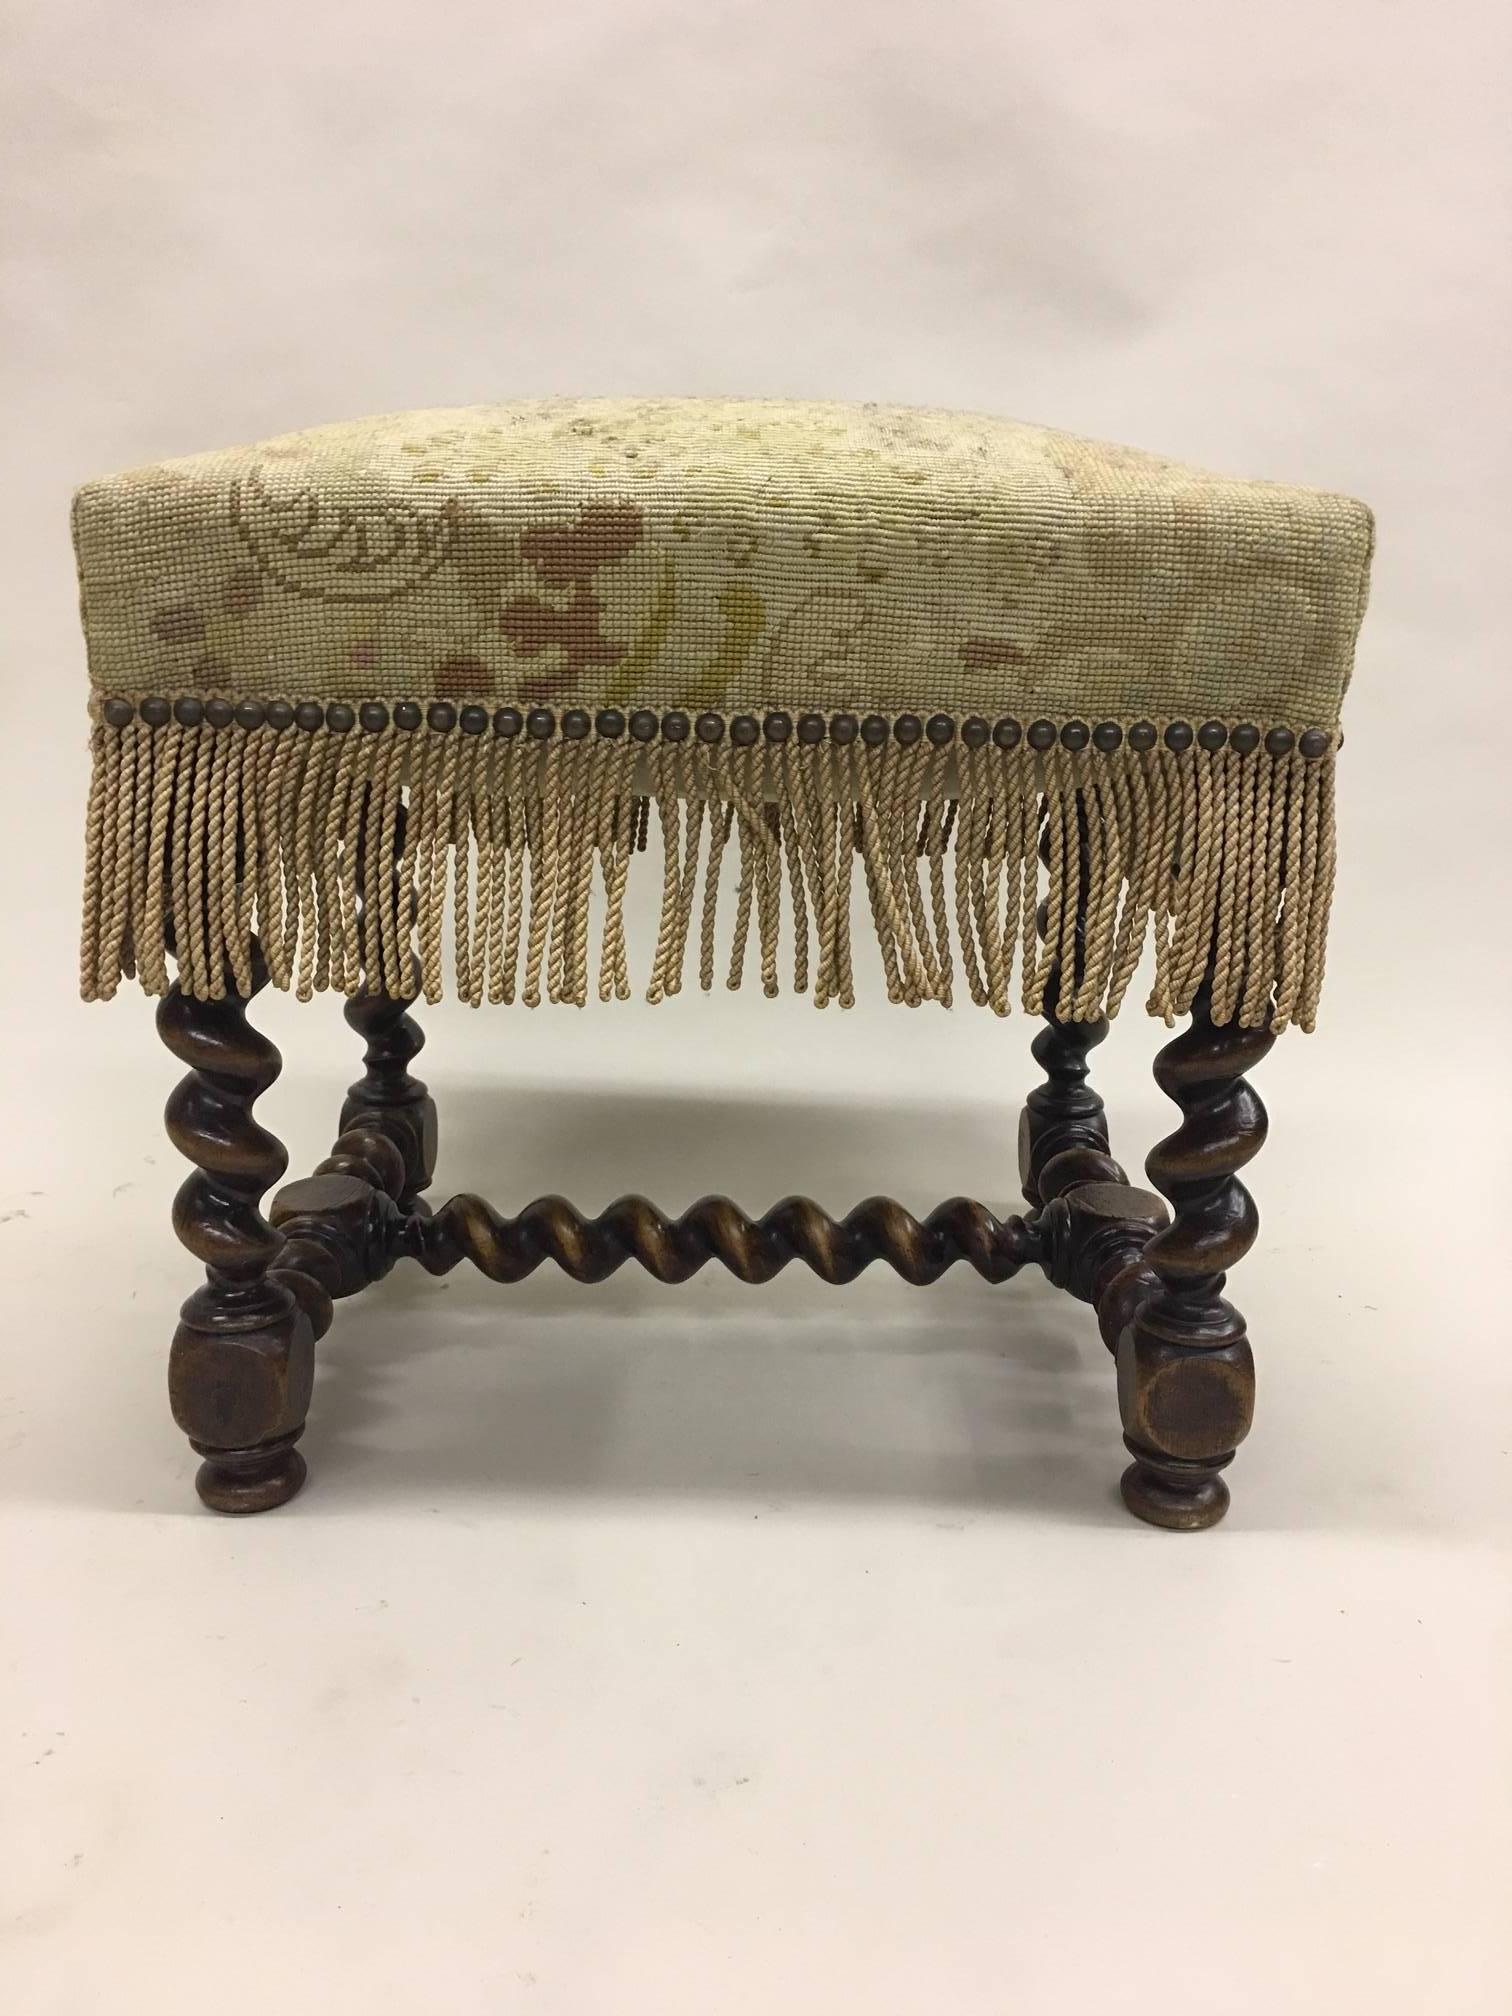 Elegant, timeless pair of French hand-carved benches, stools or ottomans in the style of Louis XIII. The pieces are carved in a barley twist pattern. The seats are in needlepoint but can be changed to suit taste as the pieces can function in a hip